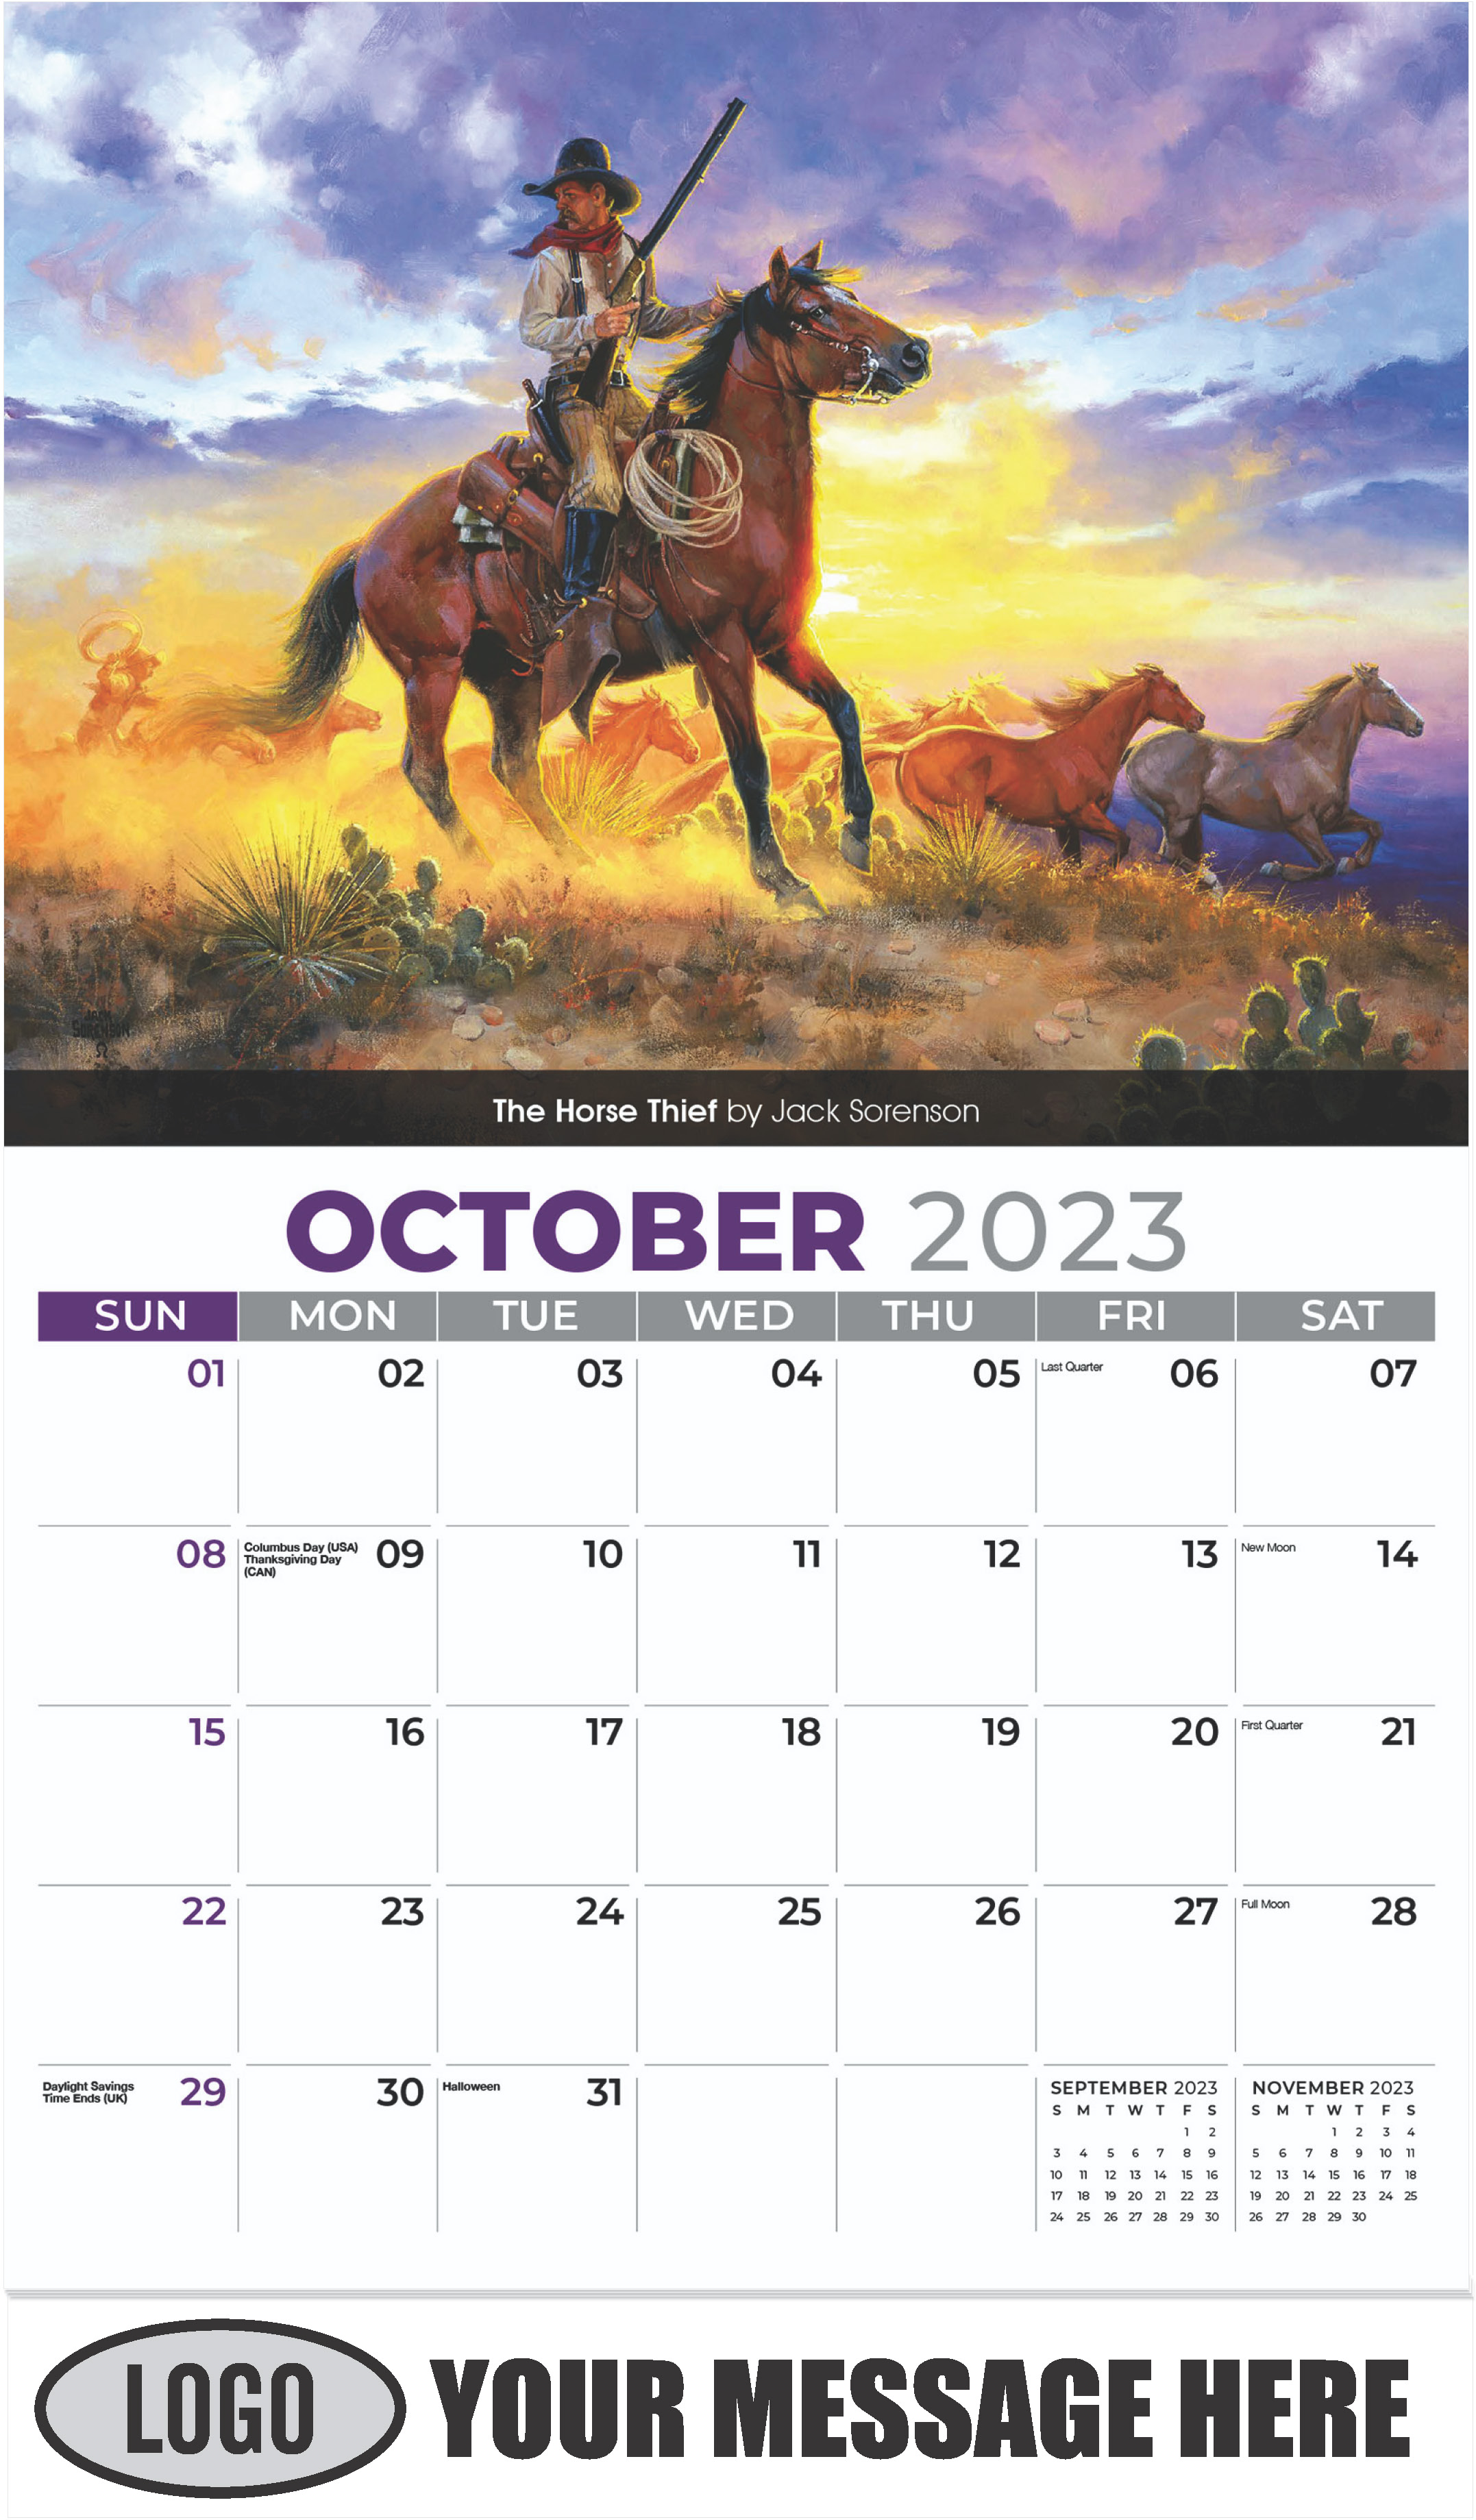 The Horse Thief by Jack Sorenson - October - Spirit of the West 2023 Promotional Calendar